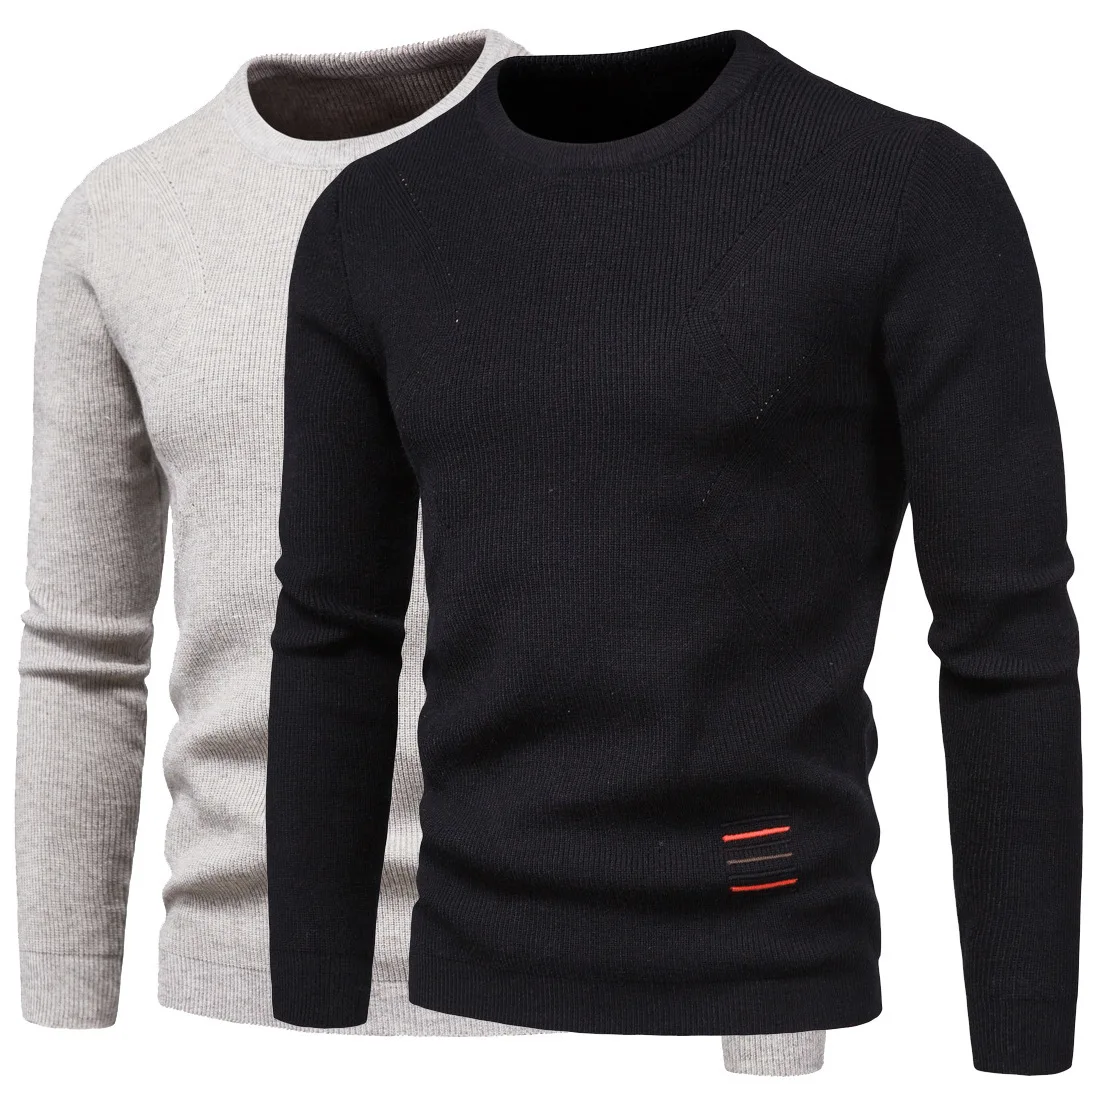 New Fashion Brand Knit High End Designer Winter Wool Pullover Black Sweater For Man Cool Autum Casual Jumper Mens Clothing